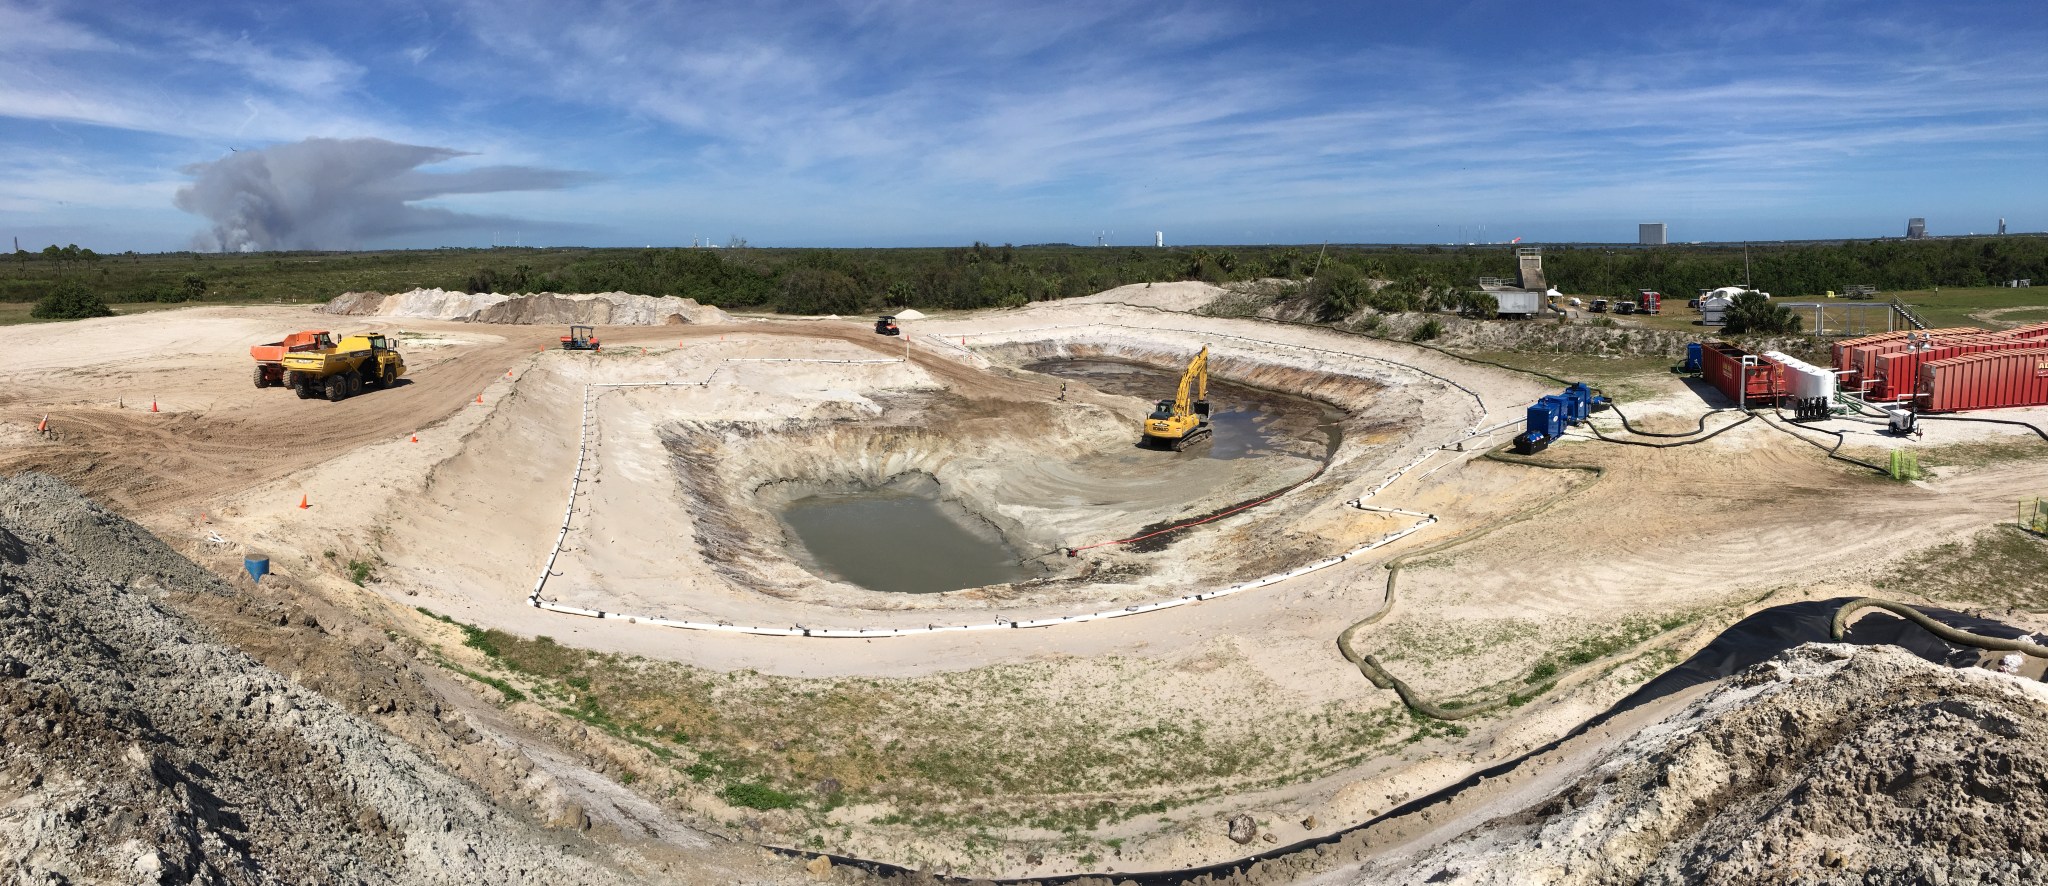 Active restoration site with construction equipment working